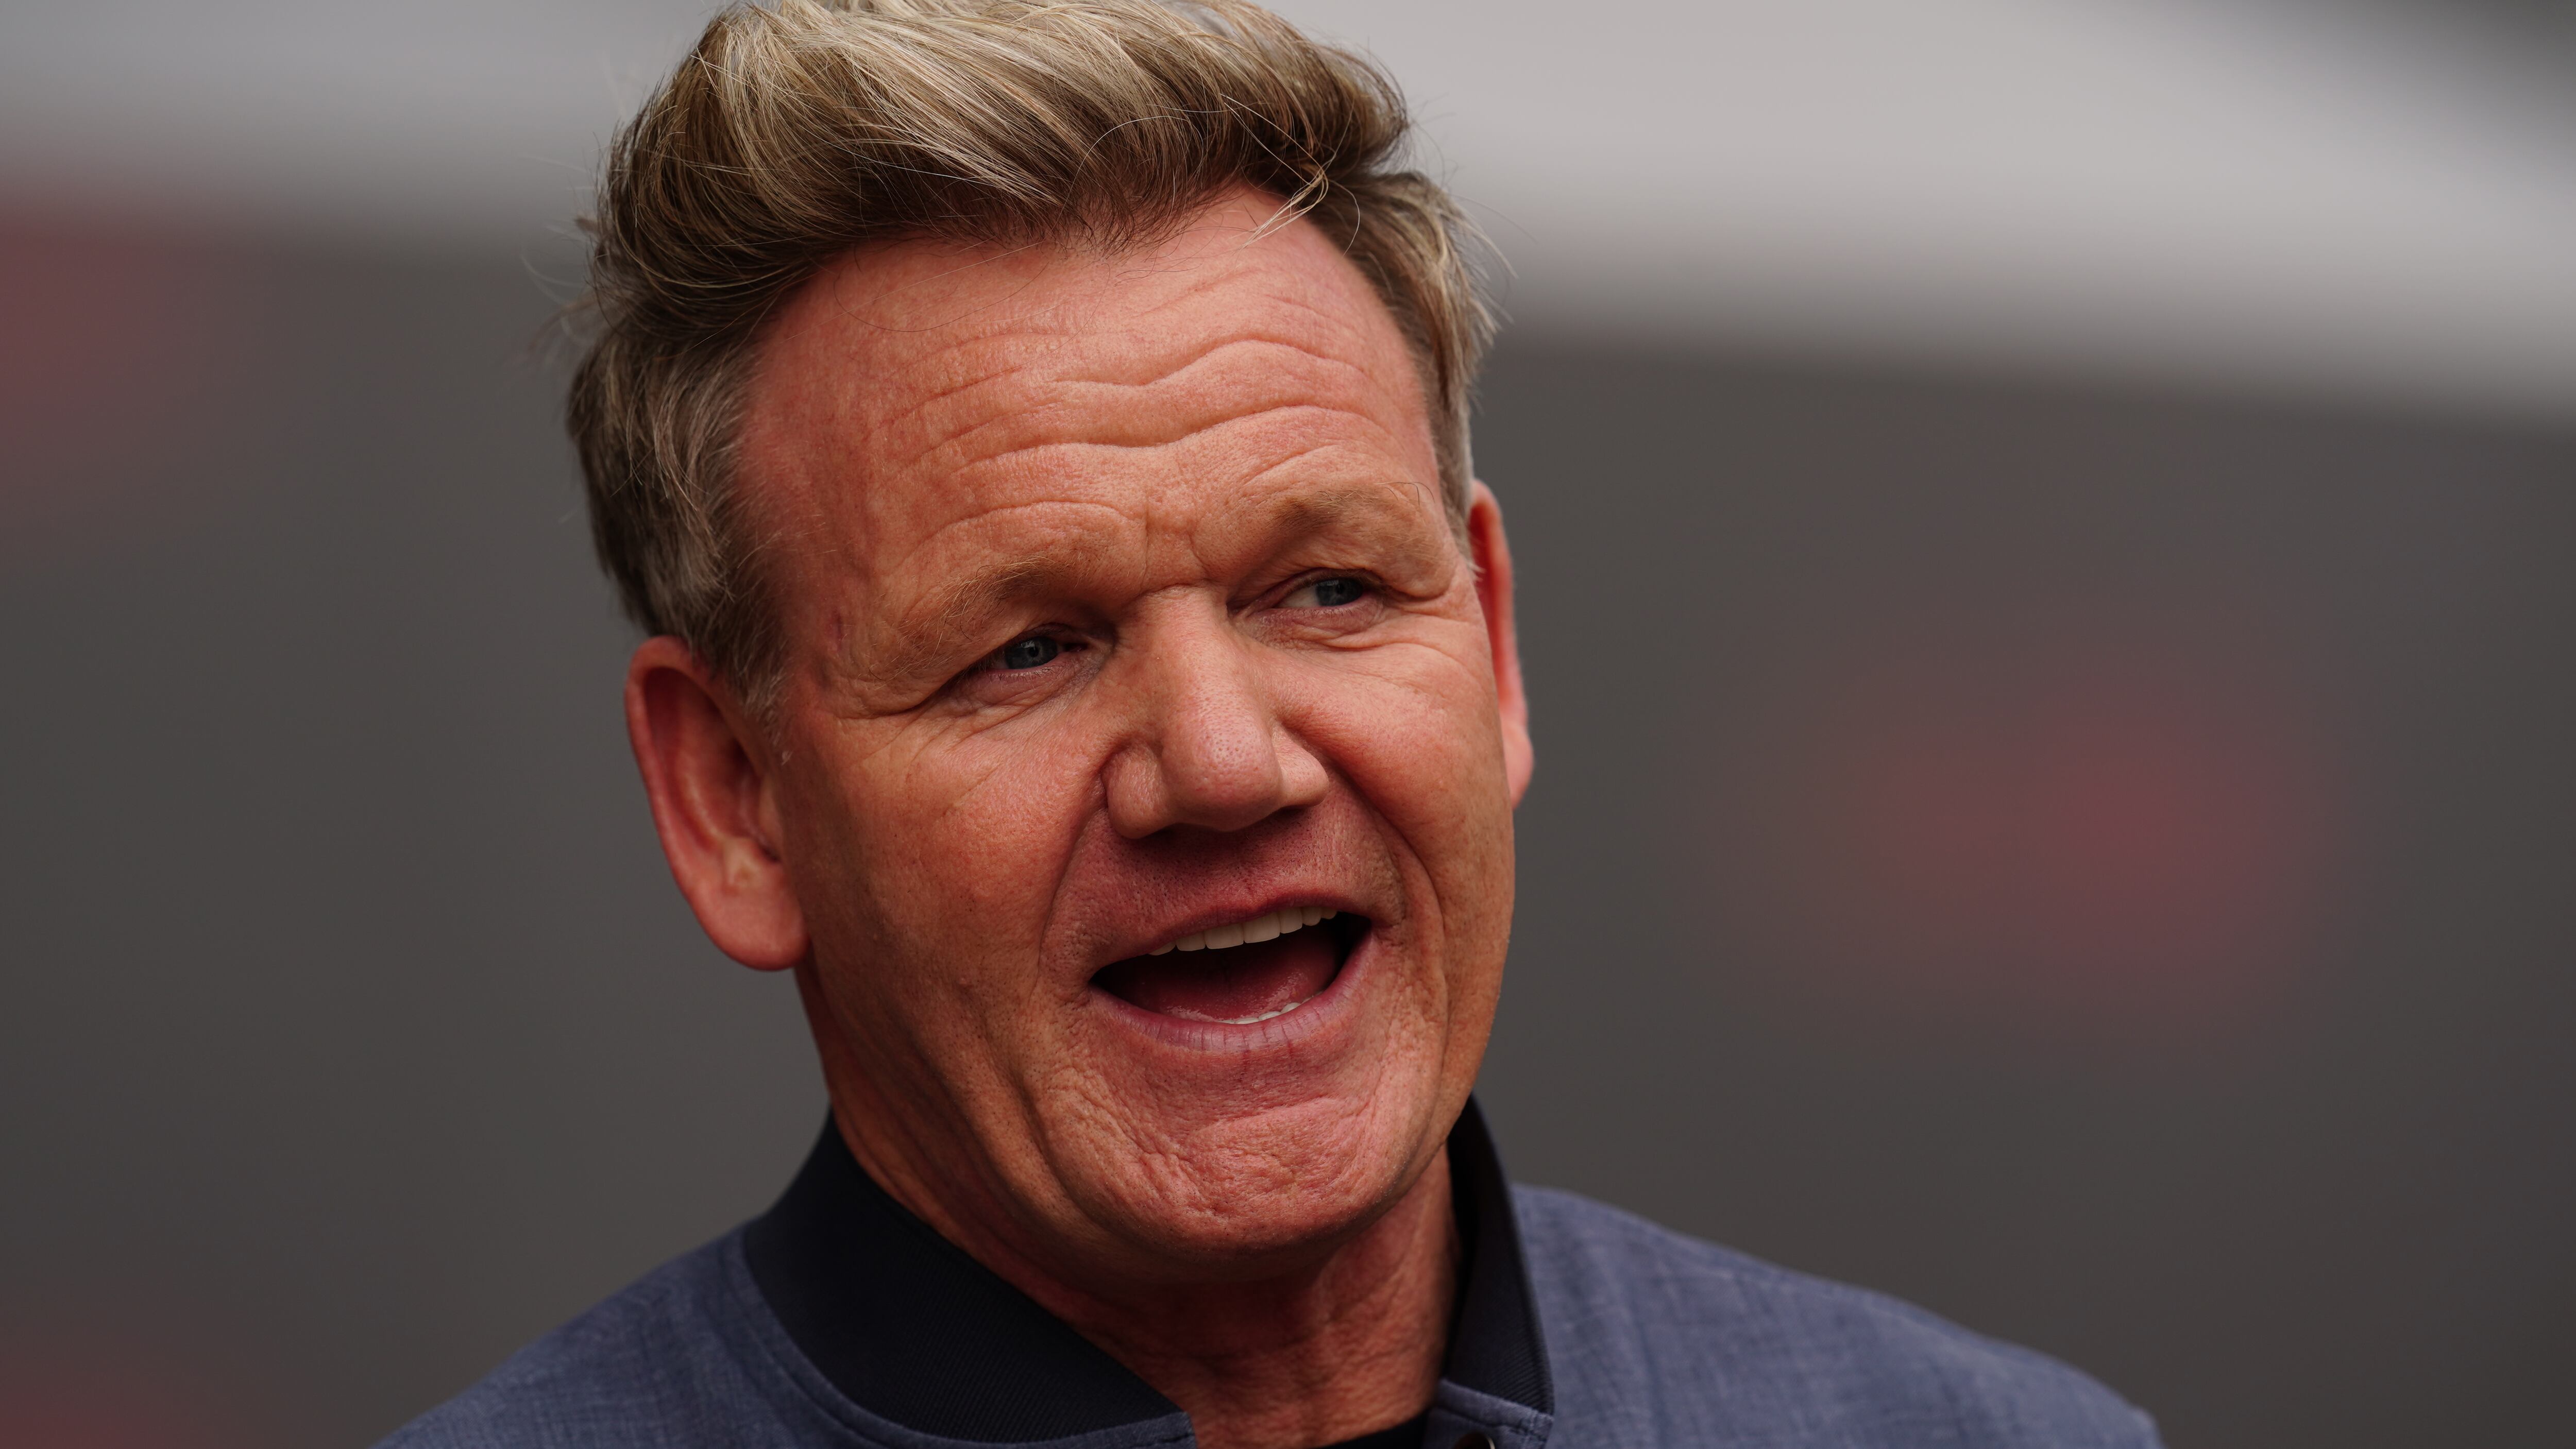 Gordon Ramsay was injured in a cycling accident